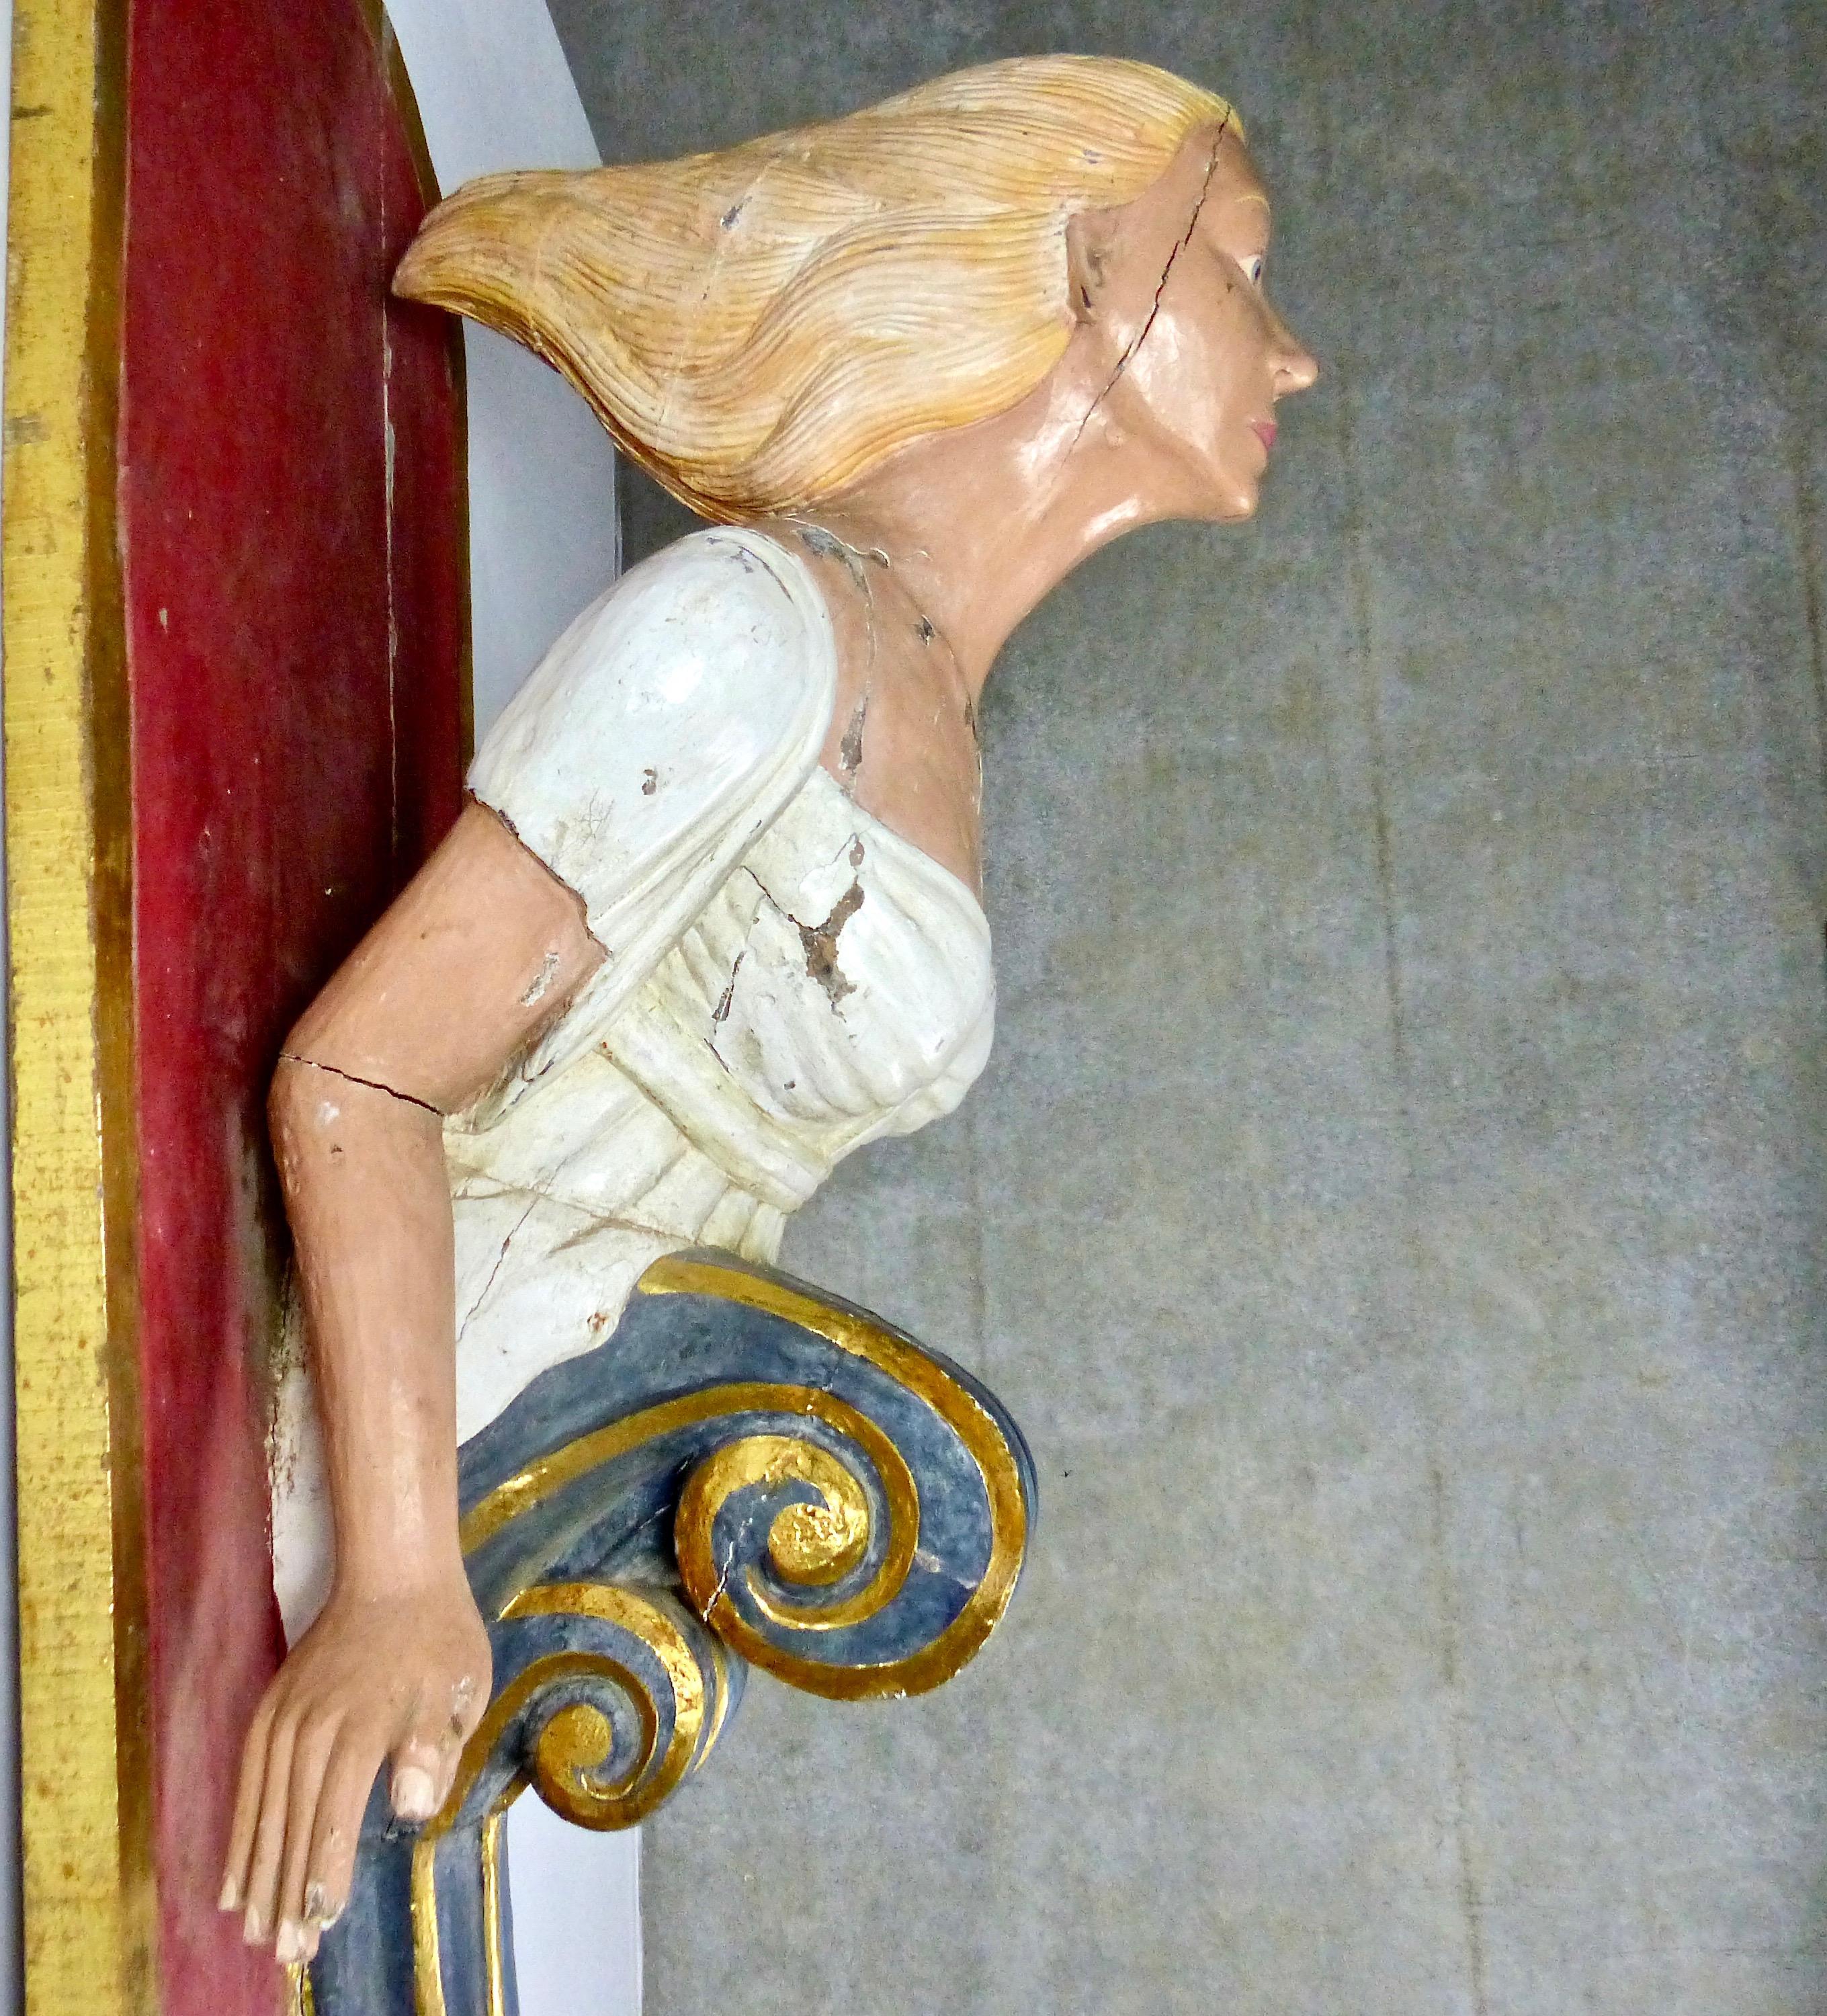 Intriguing wooden Folk Art from a carnival or circus, representing a ship figurehead/mermaid. Hand carved in the early 20th century, it has its original, age-cracked surface paint. Nice colorful details including some gilt. Acquired from a private